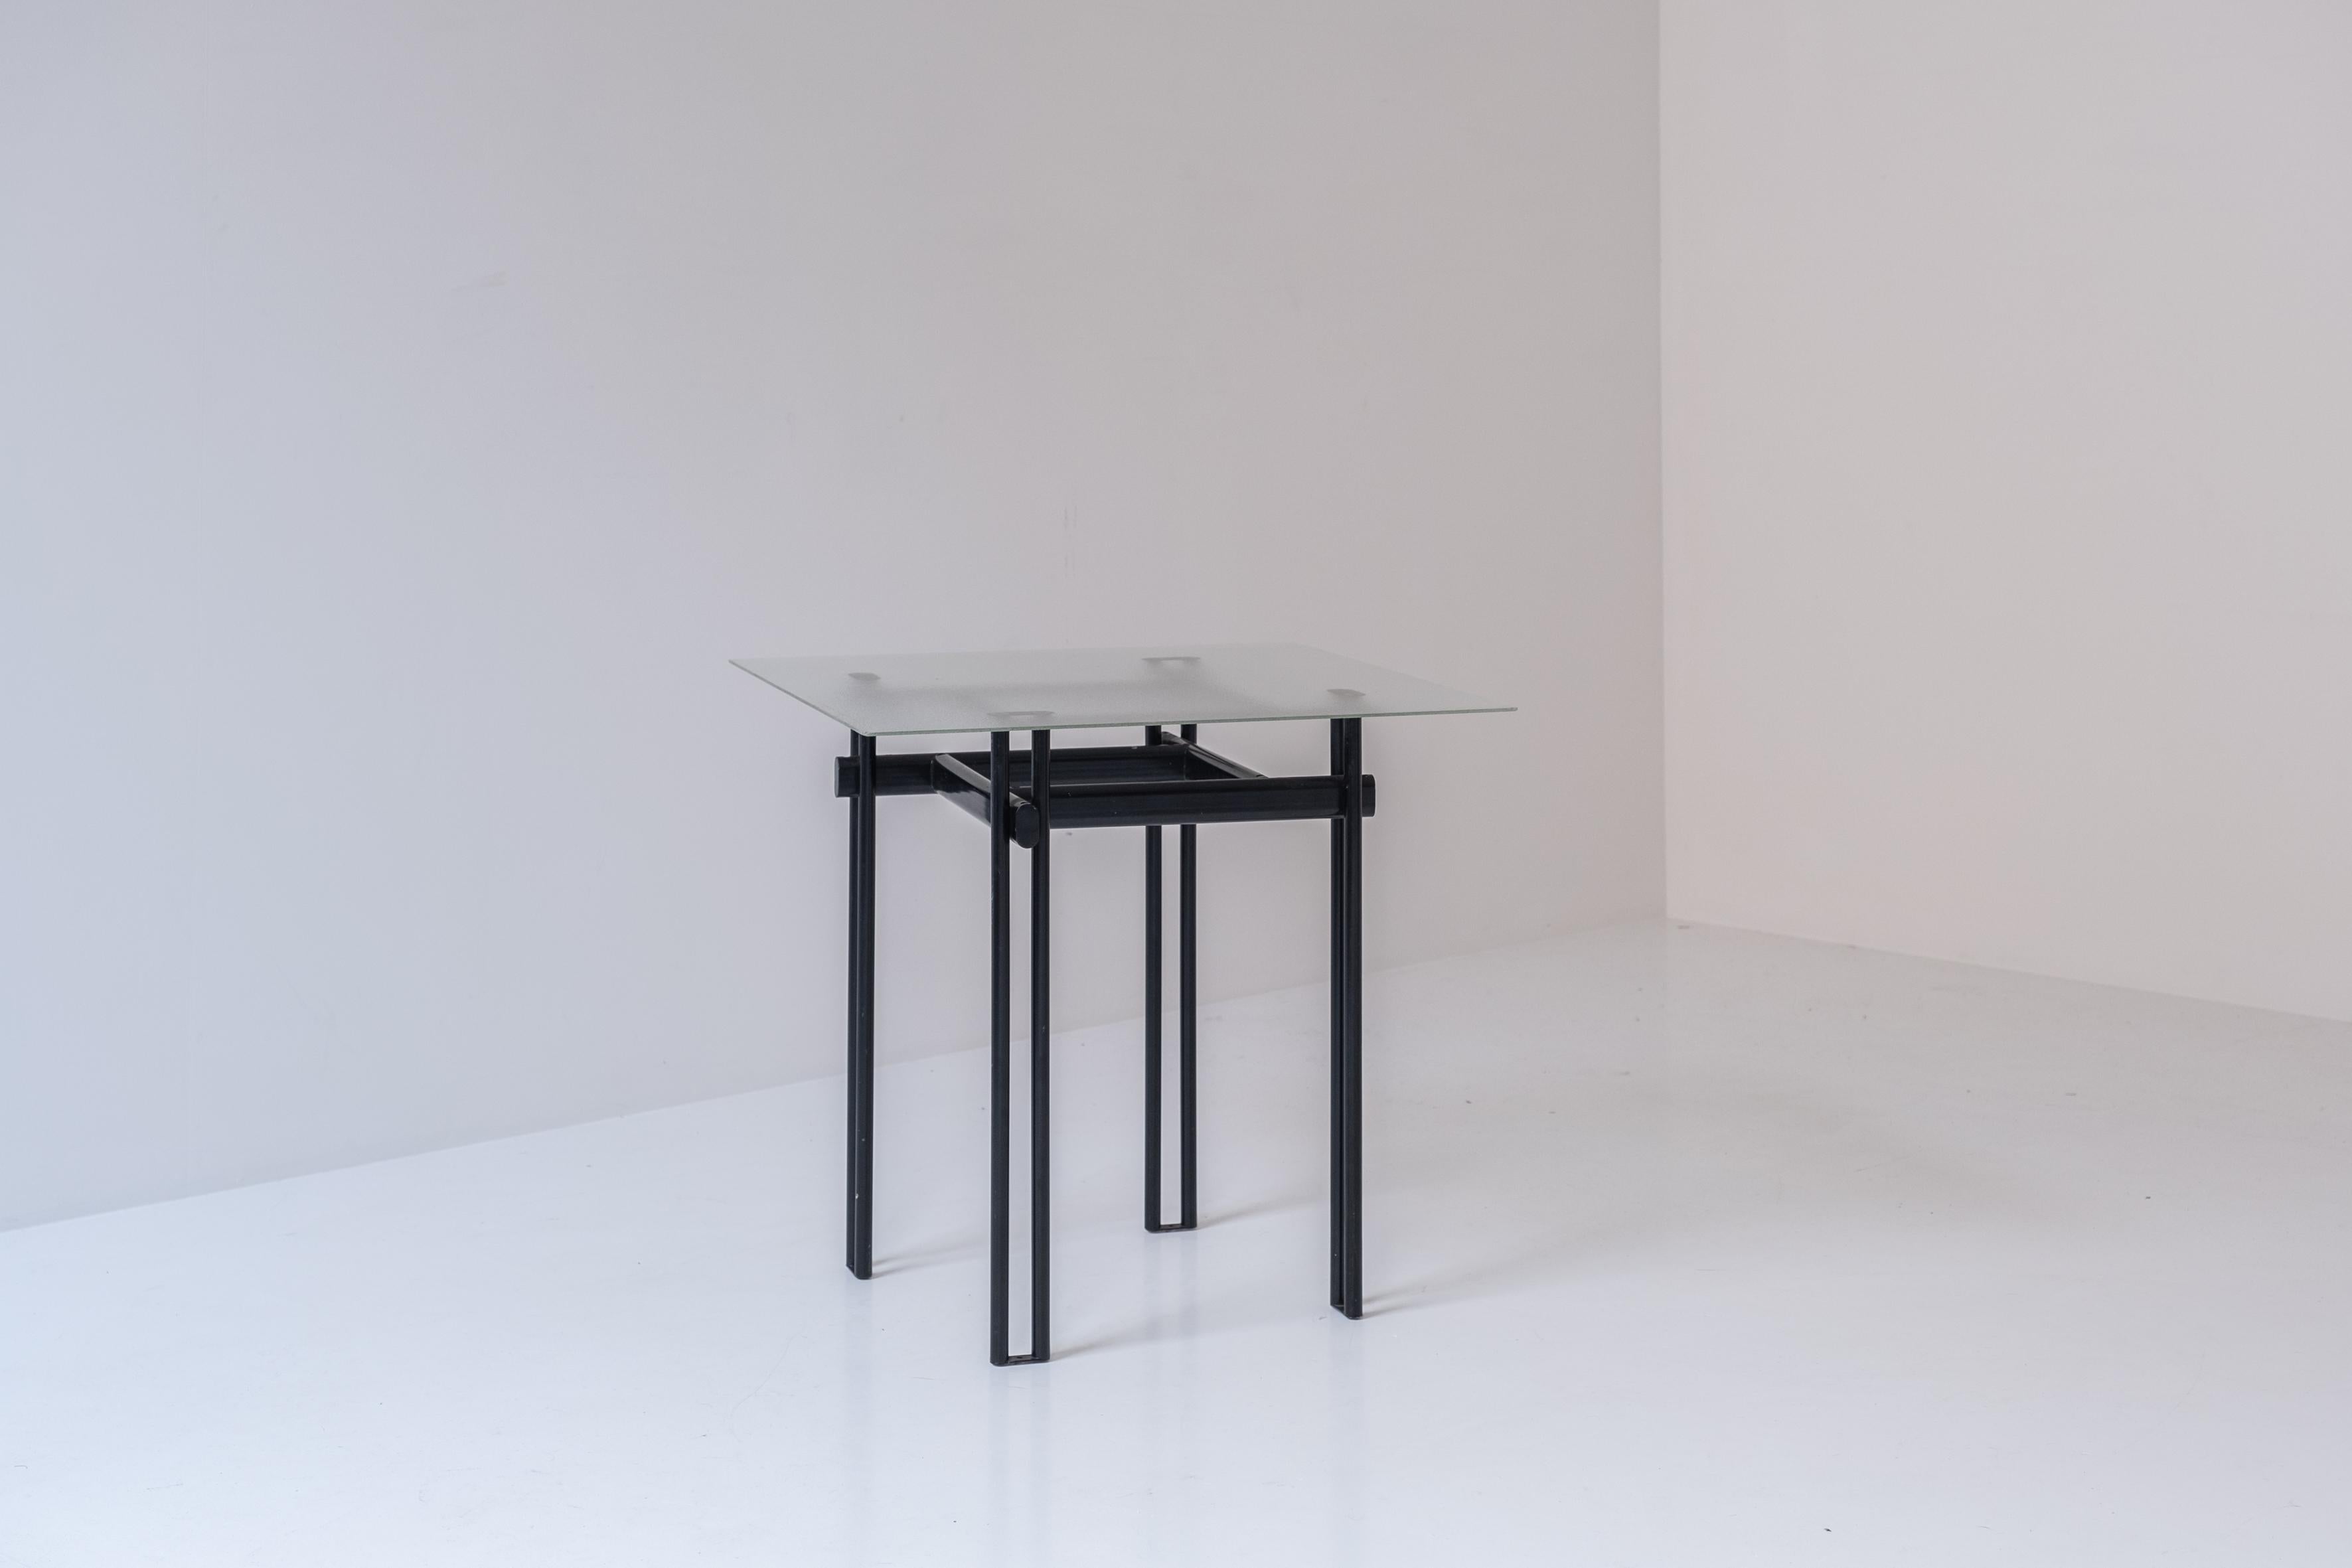 Late 20th Century Minimal Pair of Identical Side Tables from Belgium, 1980s